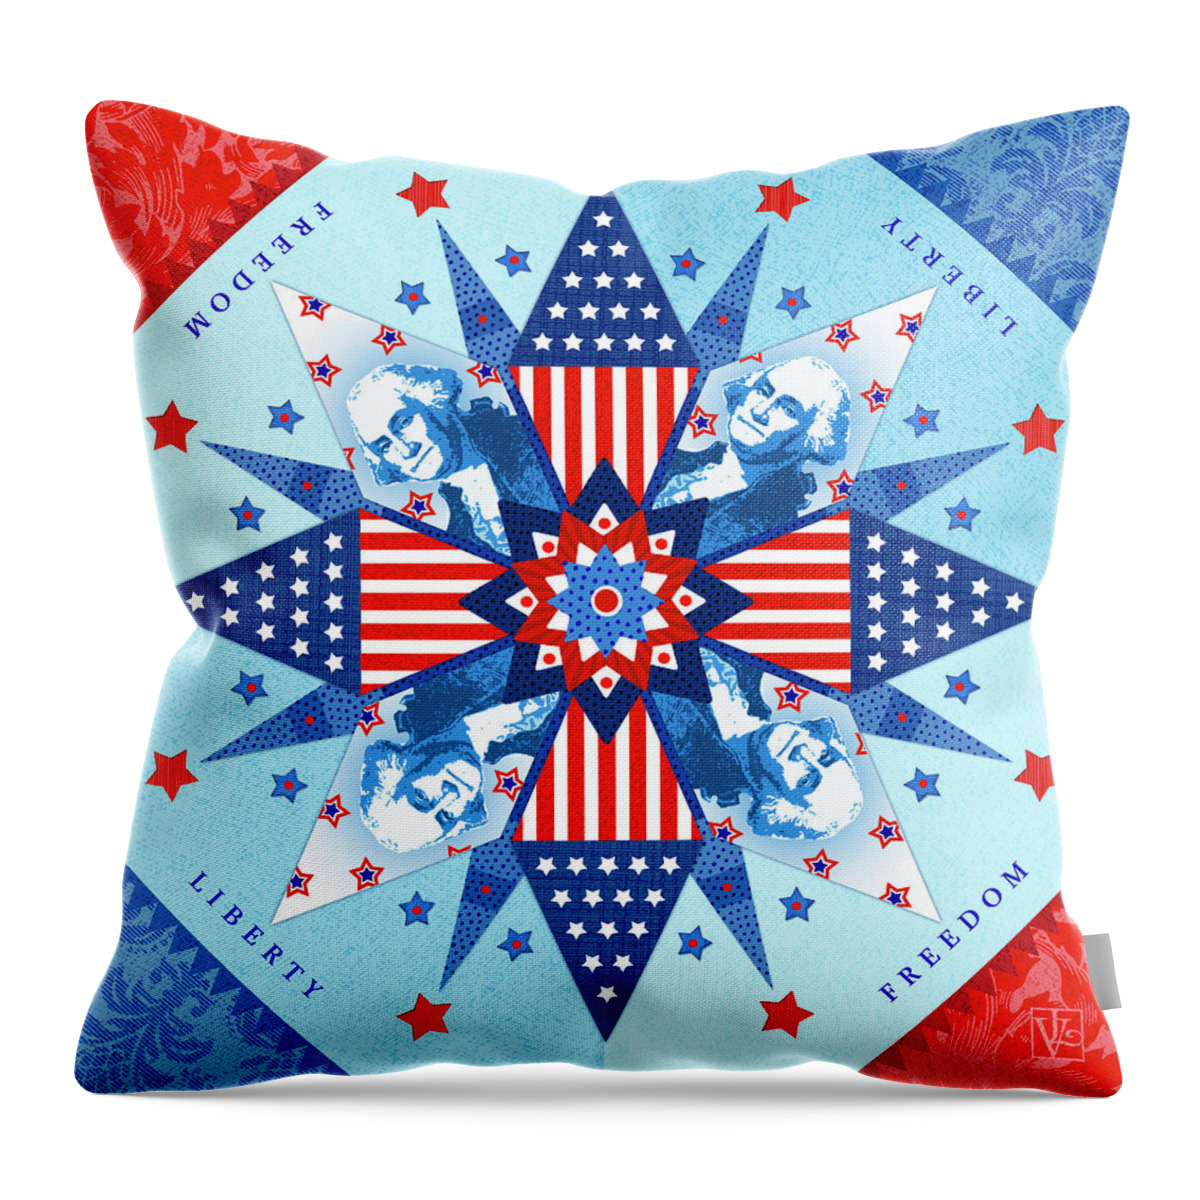 Patriotic Throw Pillow featuring the digital art Liberty Quilt by Valerie Drake Lesiak